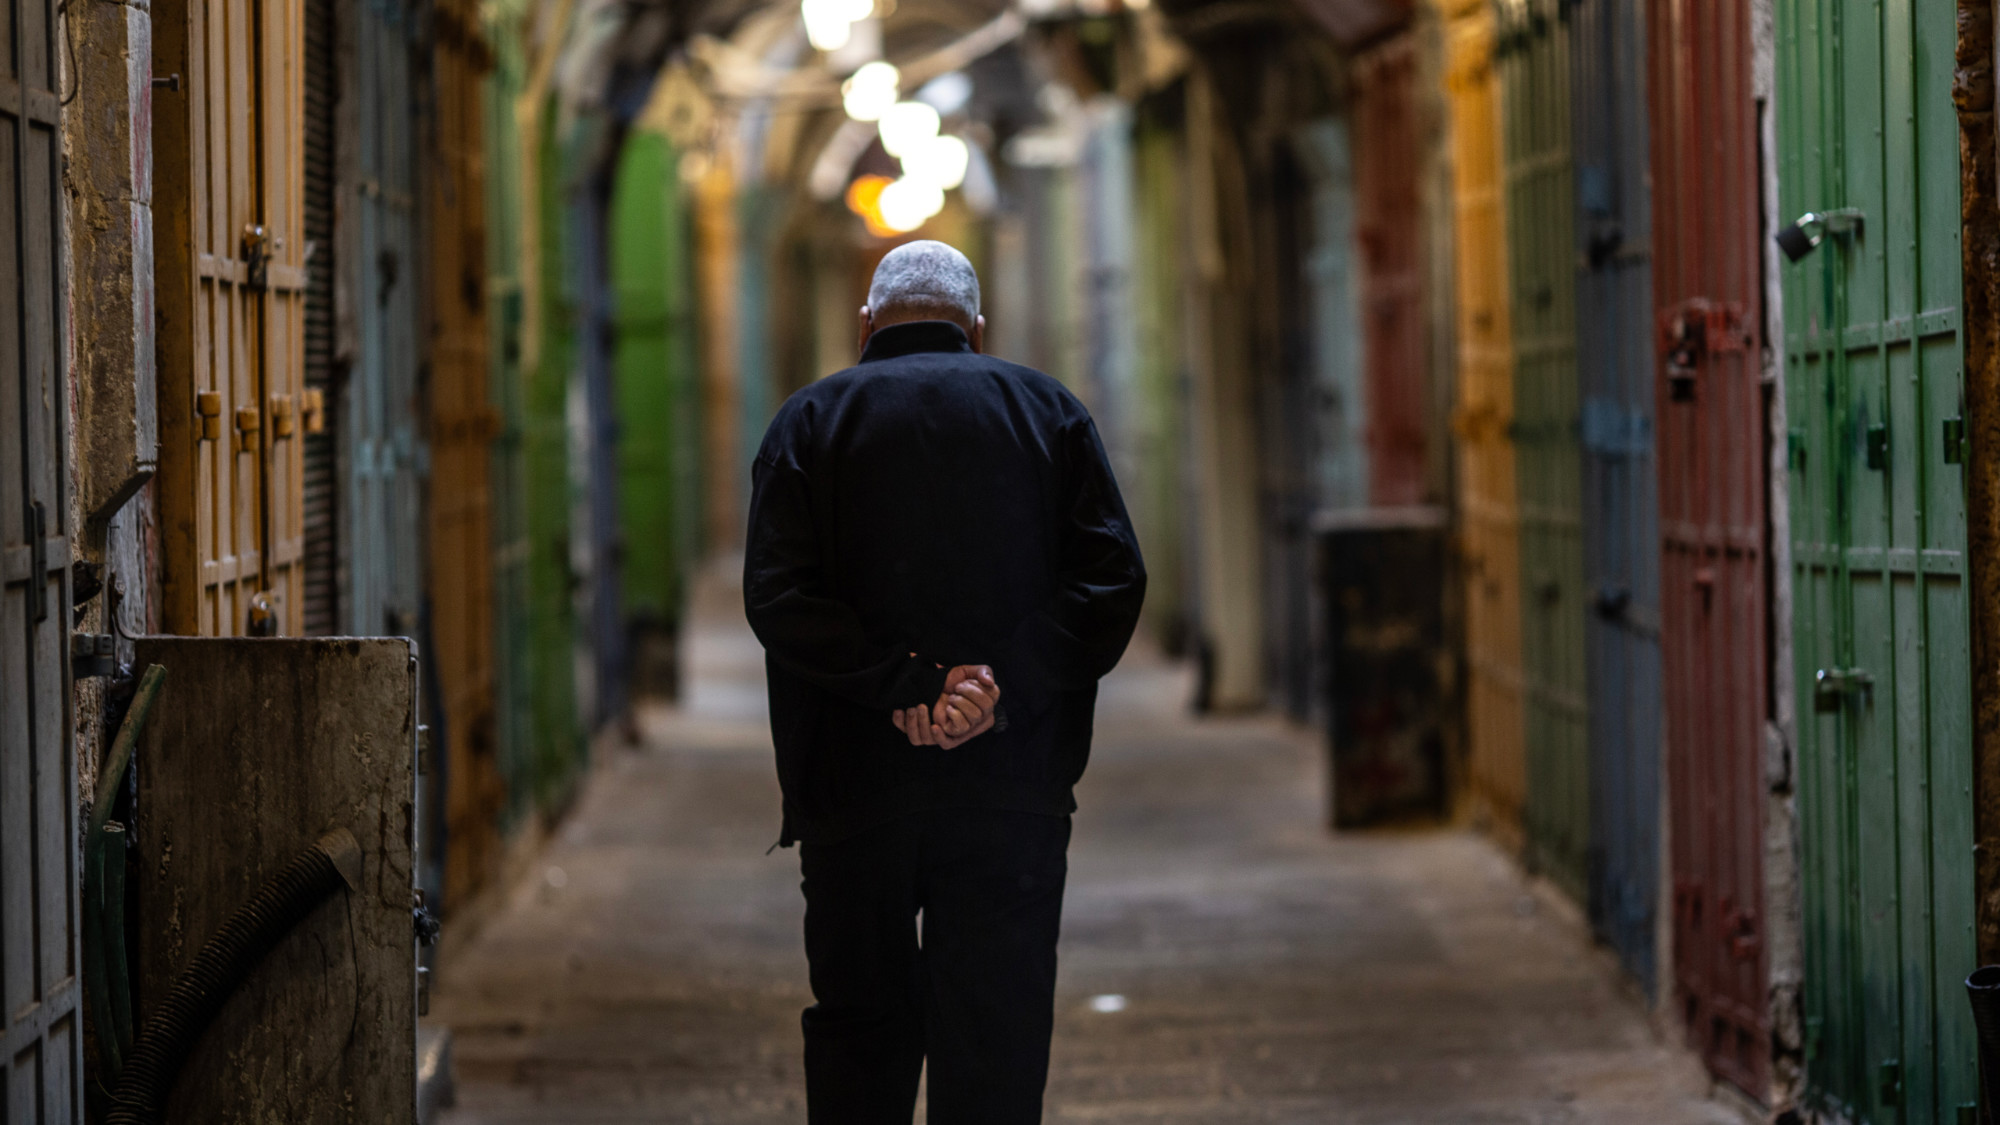 A man walks in Jerusalem's Old City amid a commercial strike observed in the city calling for a ceasefire in Gaza (MEE/Latifeh Abdellatif)